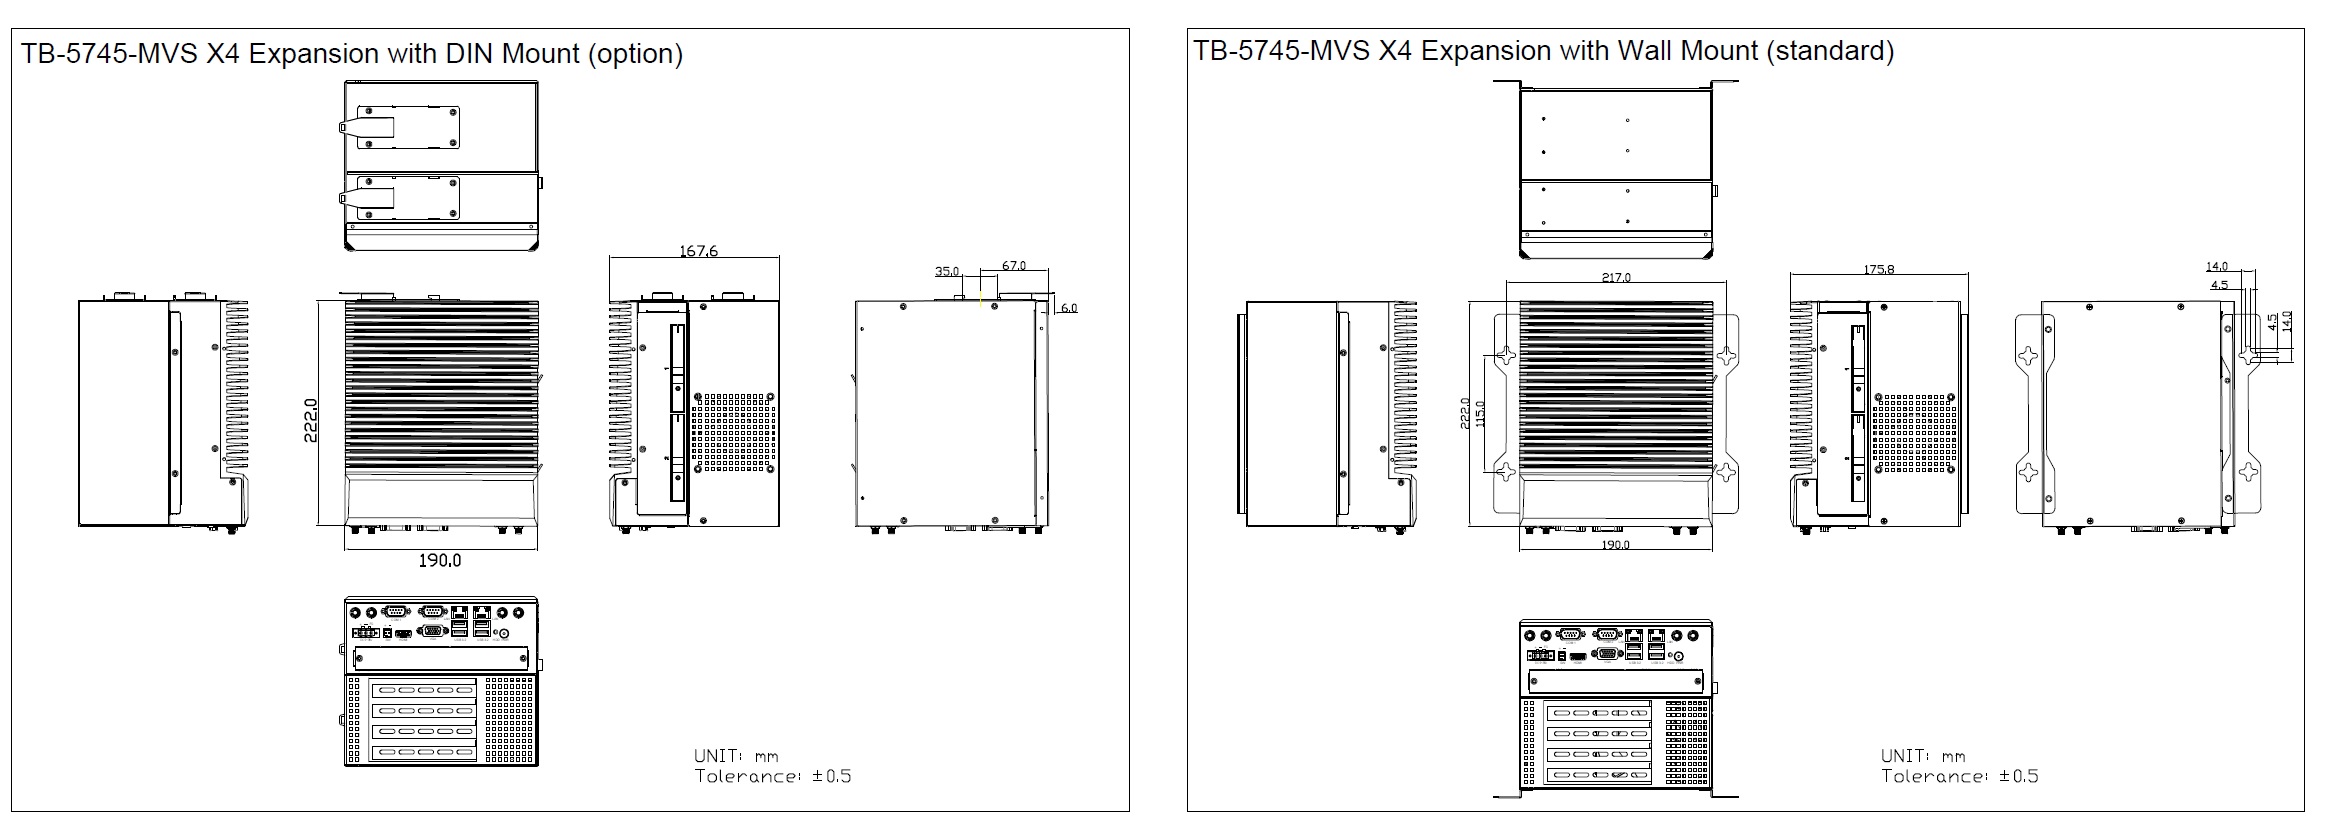 TB-5745 technical drawing 4x expansion